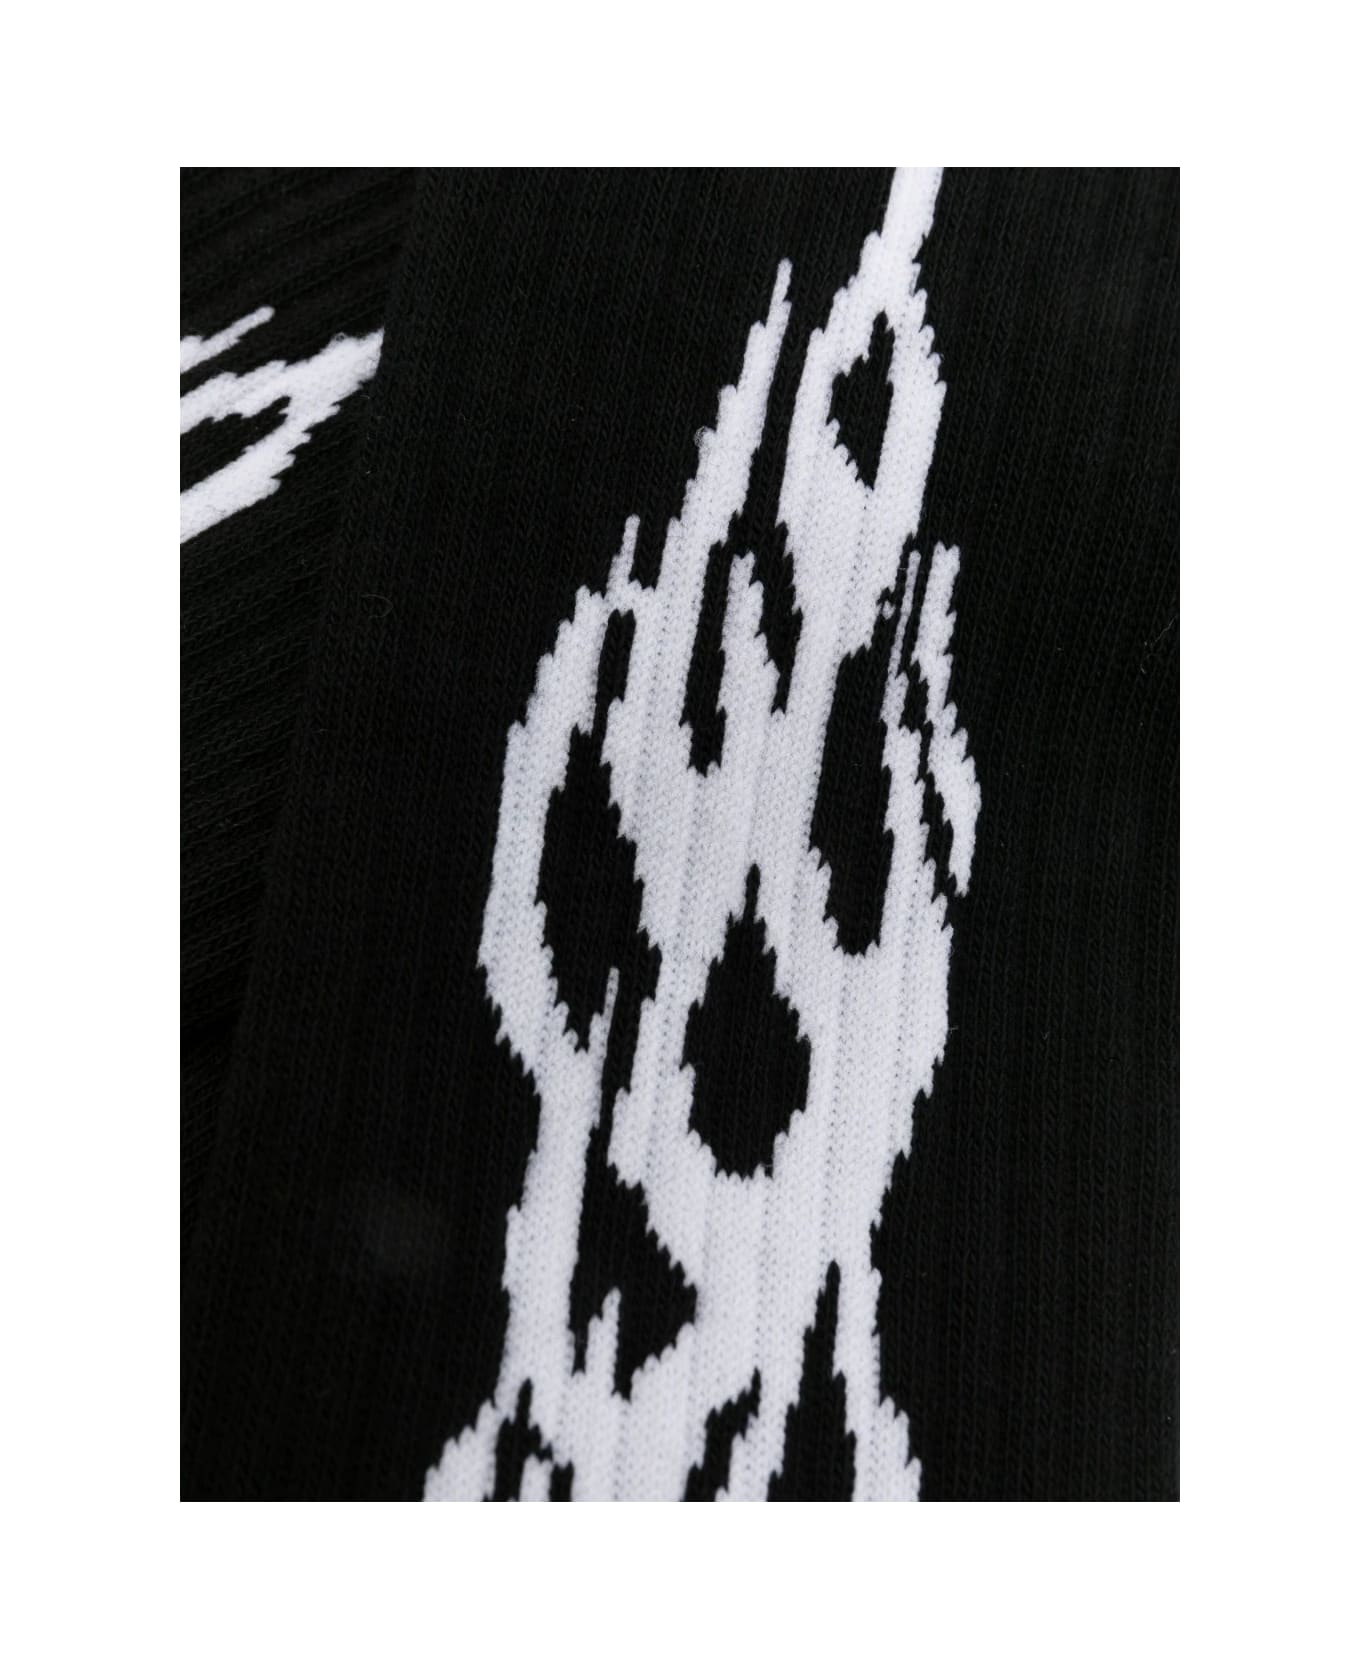 Vision of Super Black Socks With Logo And Flames - Black/white